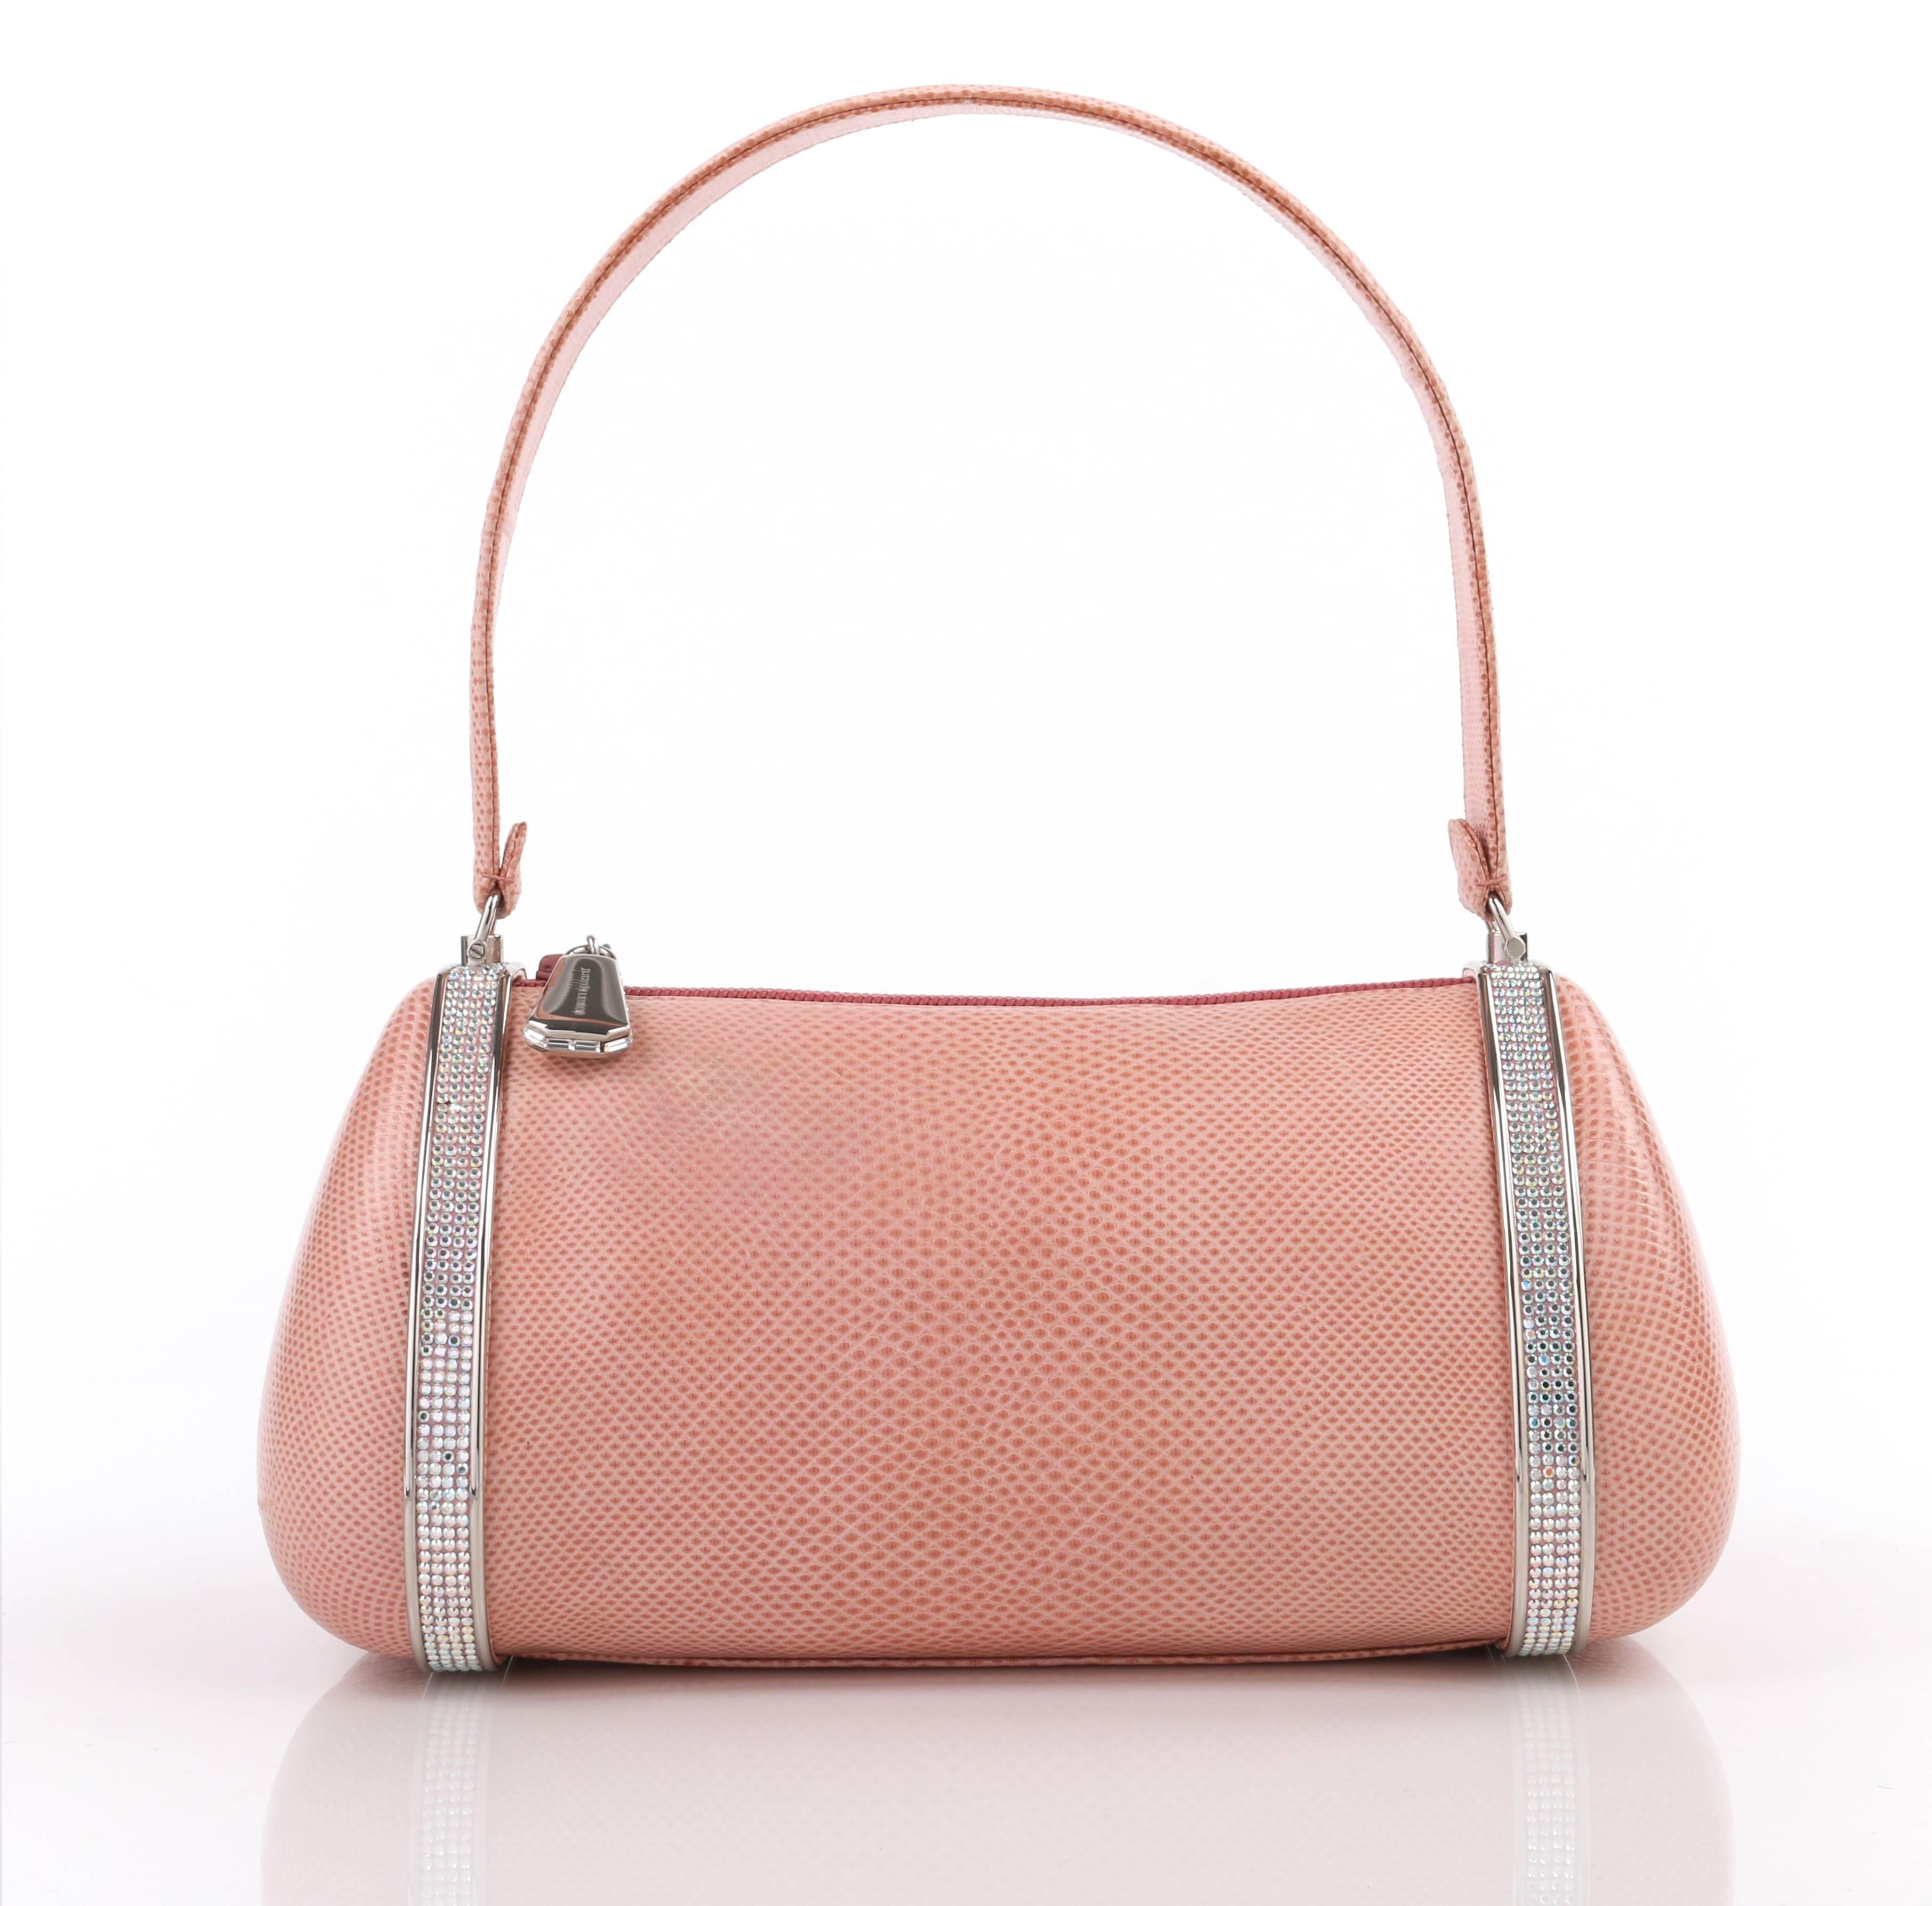 Judith Leiber c.1990's pink lizard leather and crystal rhinestone baguette. Pink lizard leather exterior with structured hard case sides. Single flat leather top handle. Silver-toned metal detail at either end with pink aurora borealis crystal